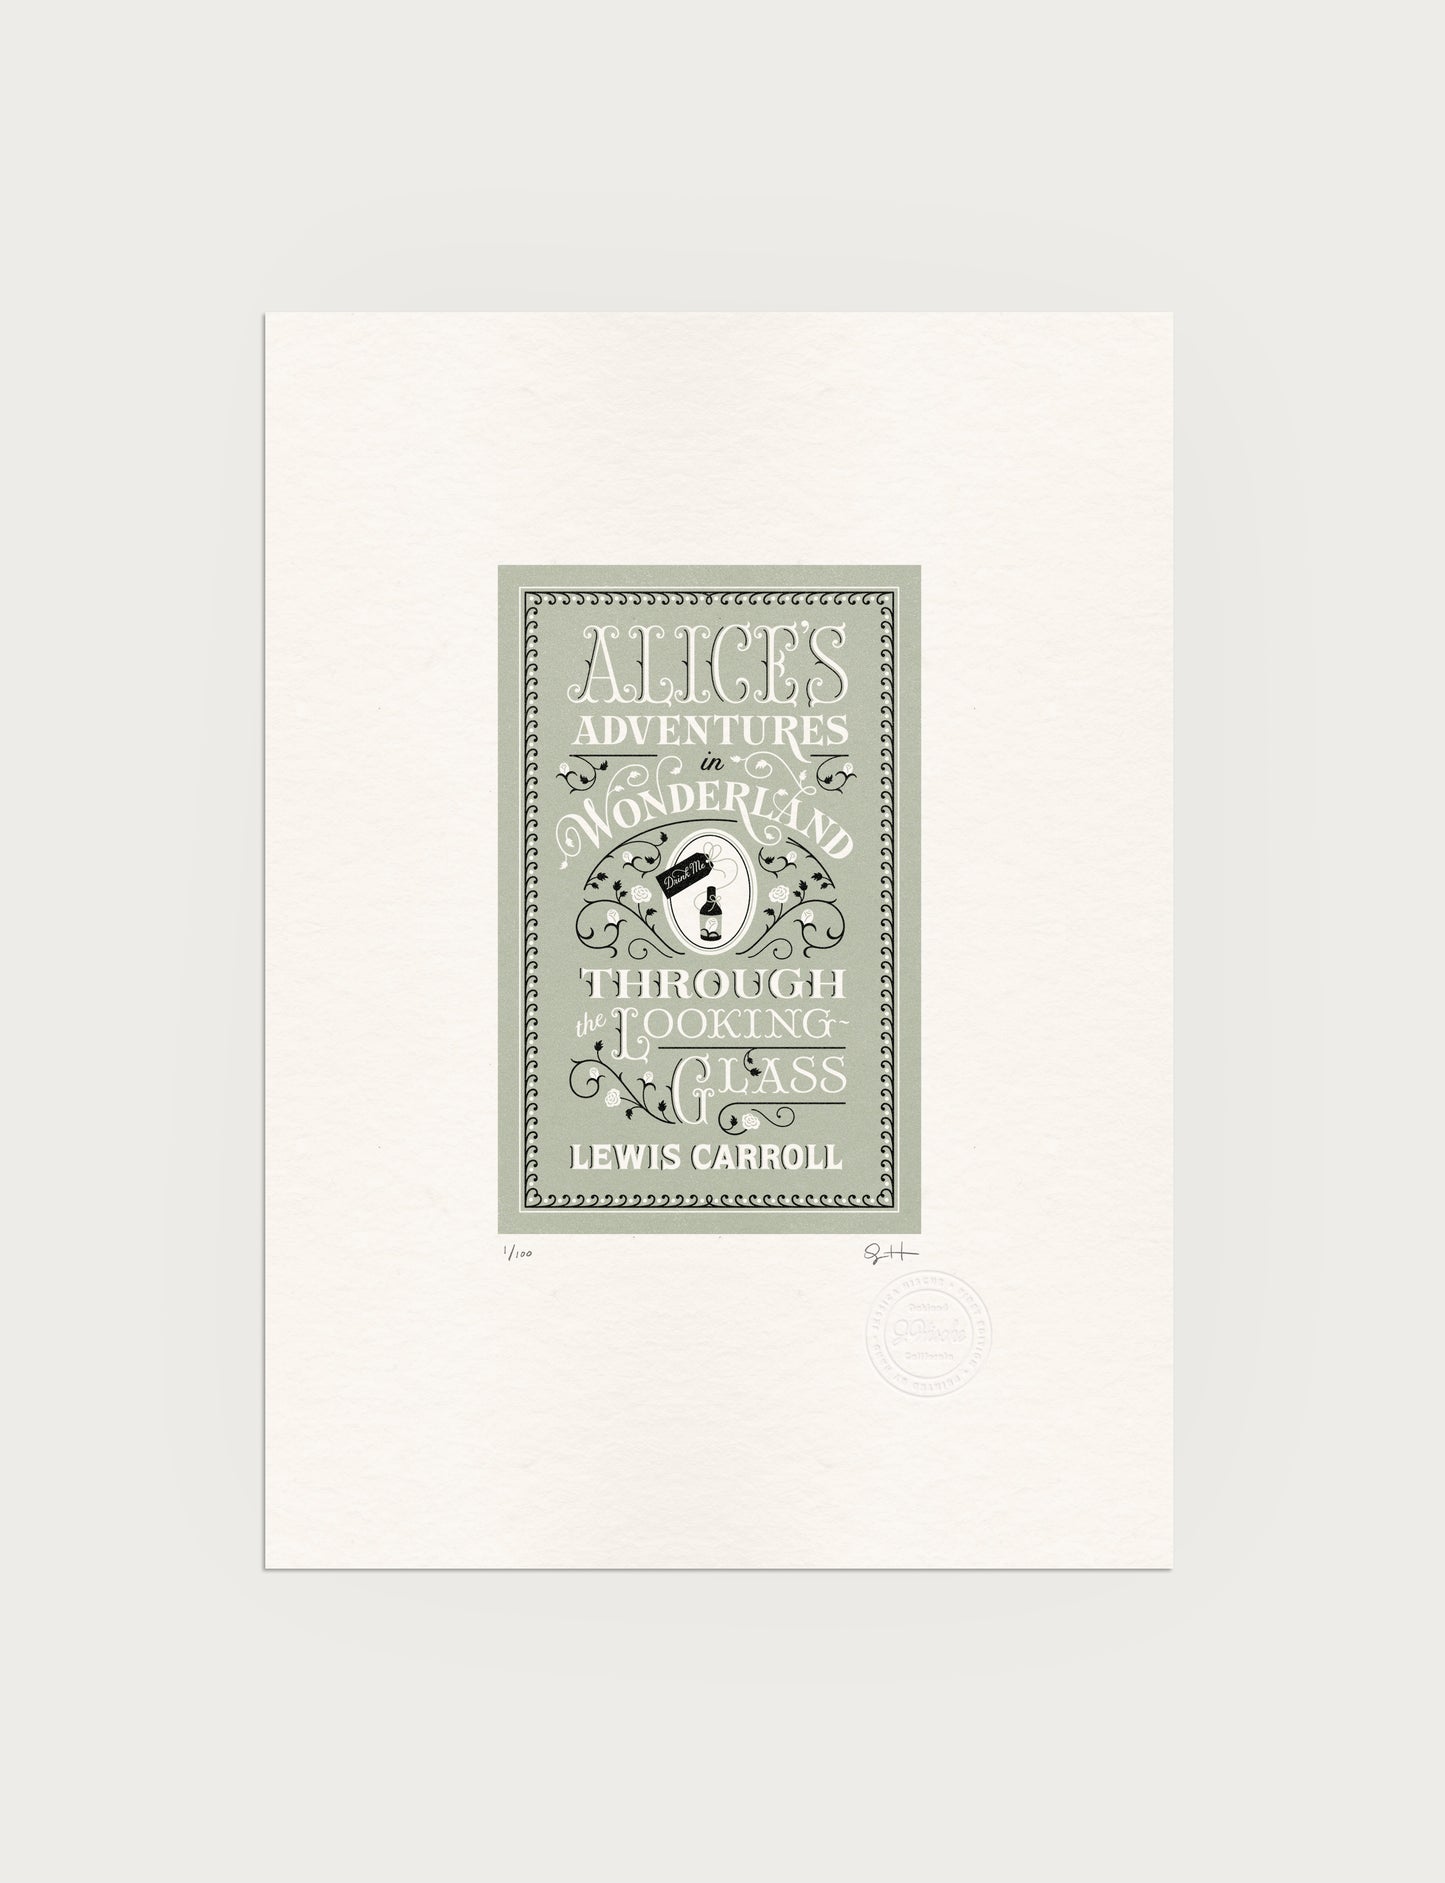 2-color letterpress print in green and black. Printed artwork is an illustrated book cover of Alice's Adventures in Wonderland including custom hand-lettering.